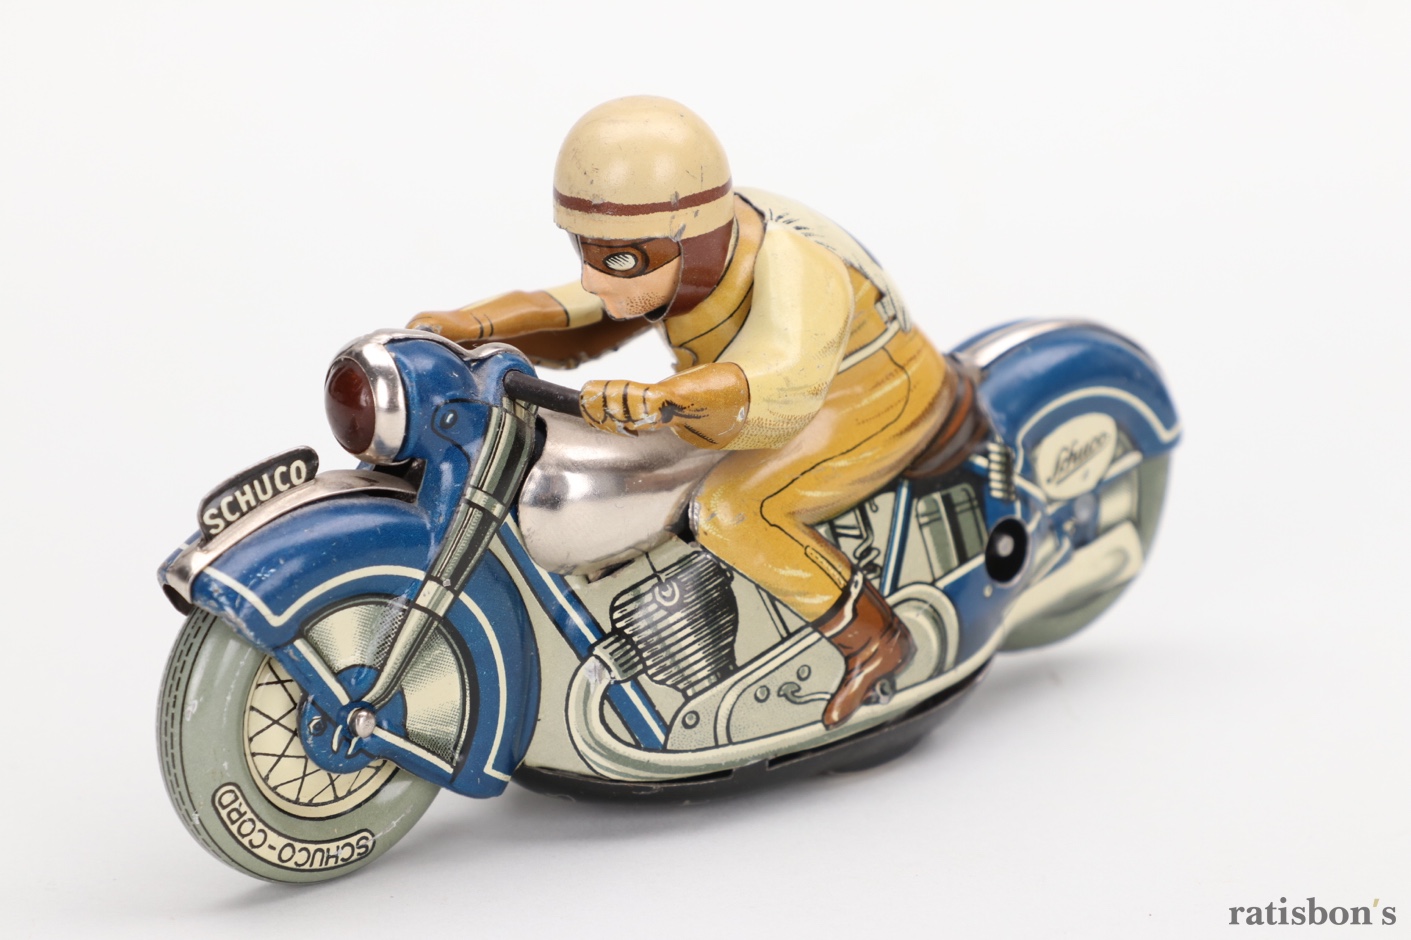 Details about   Schuco model 1006 rope motorbike in its box 